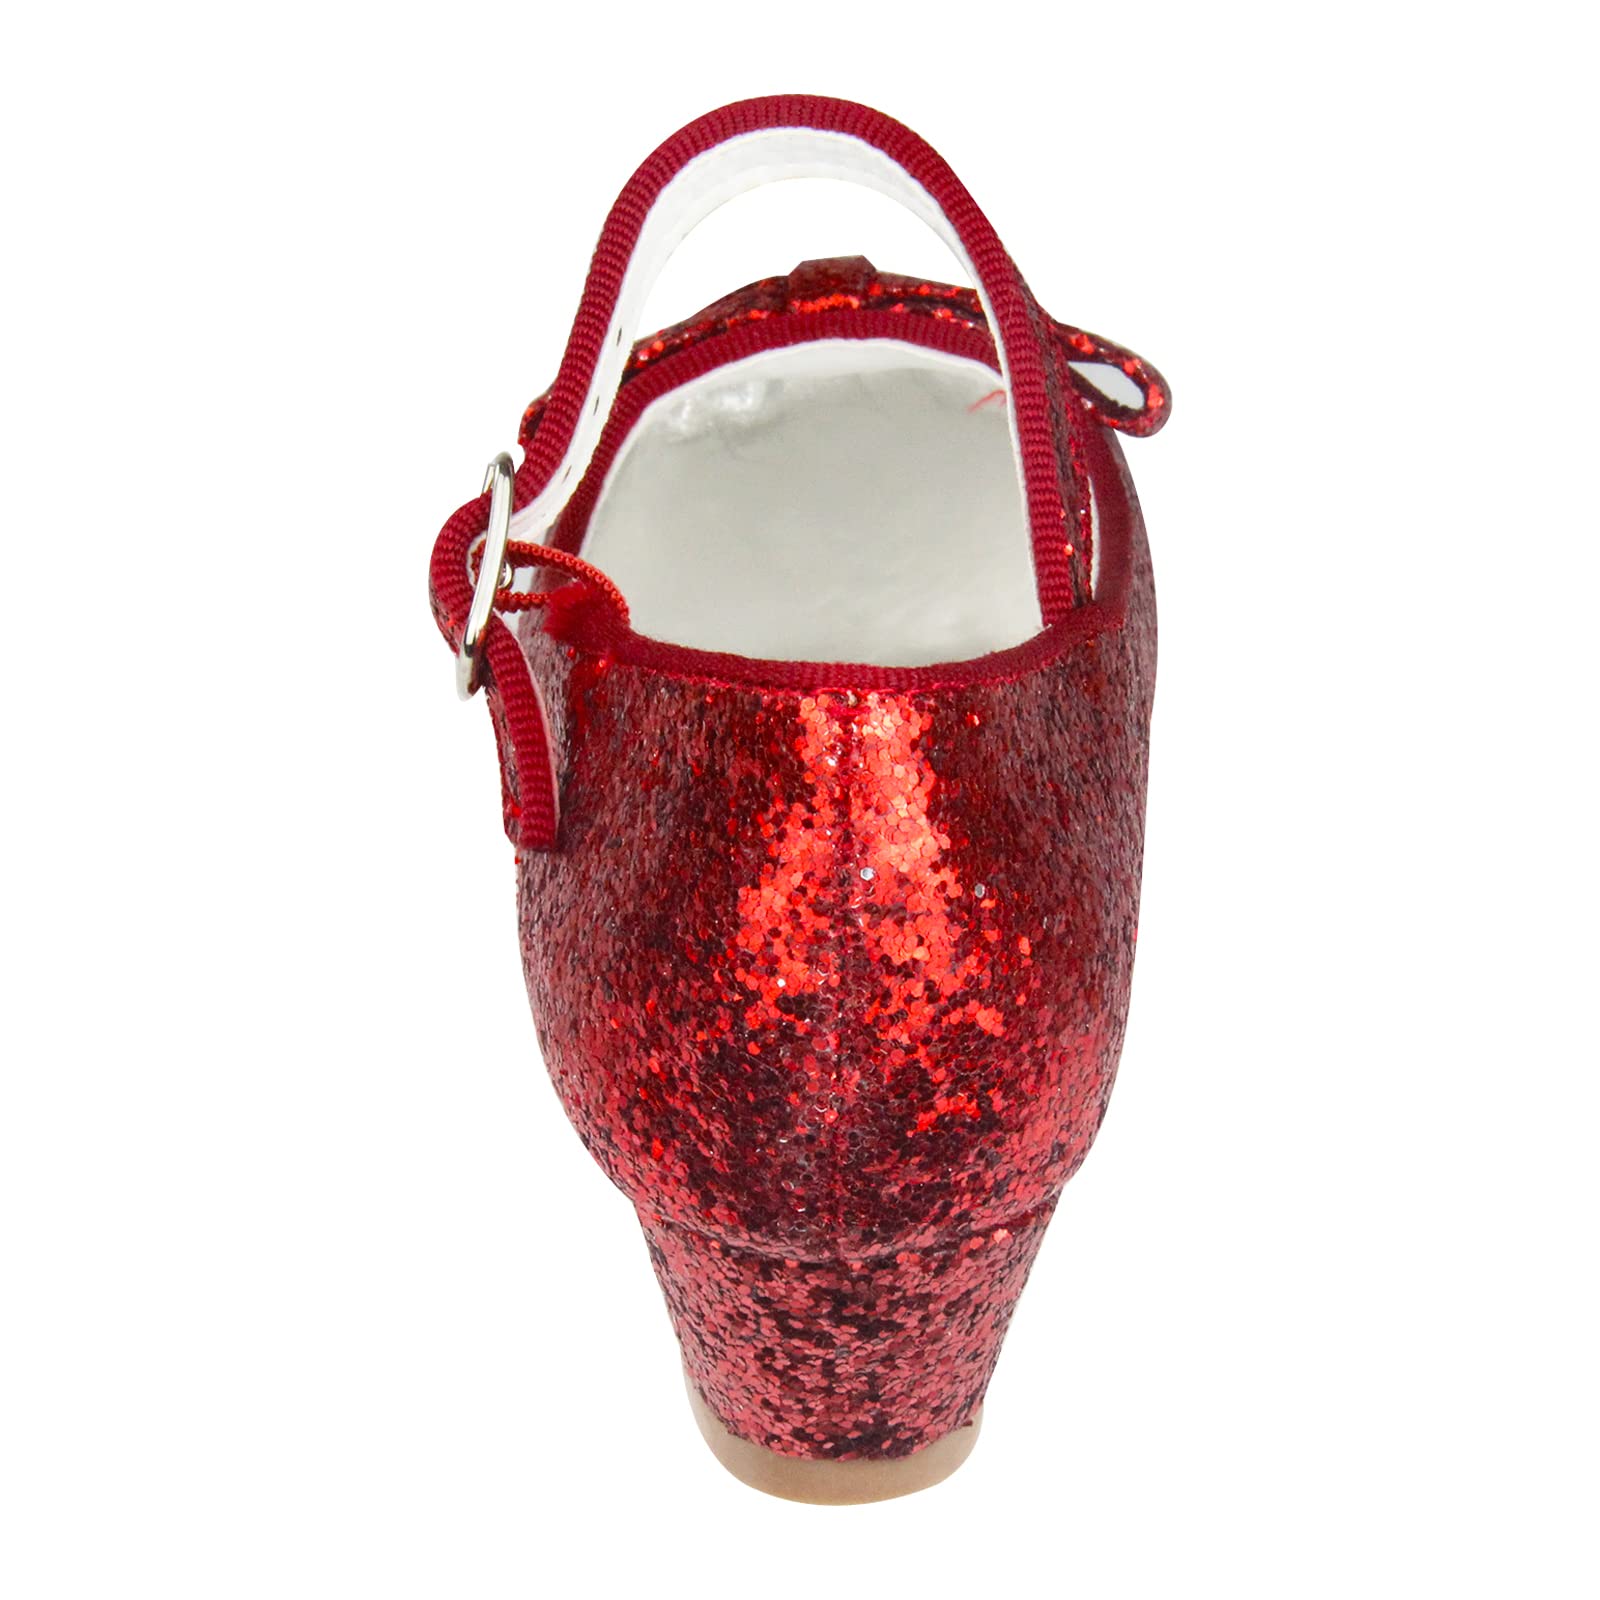 Dorothy's Ruby Red Wizard of Oz Slipper Shoes for Kids